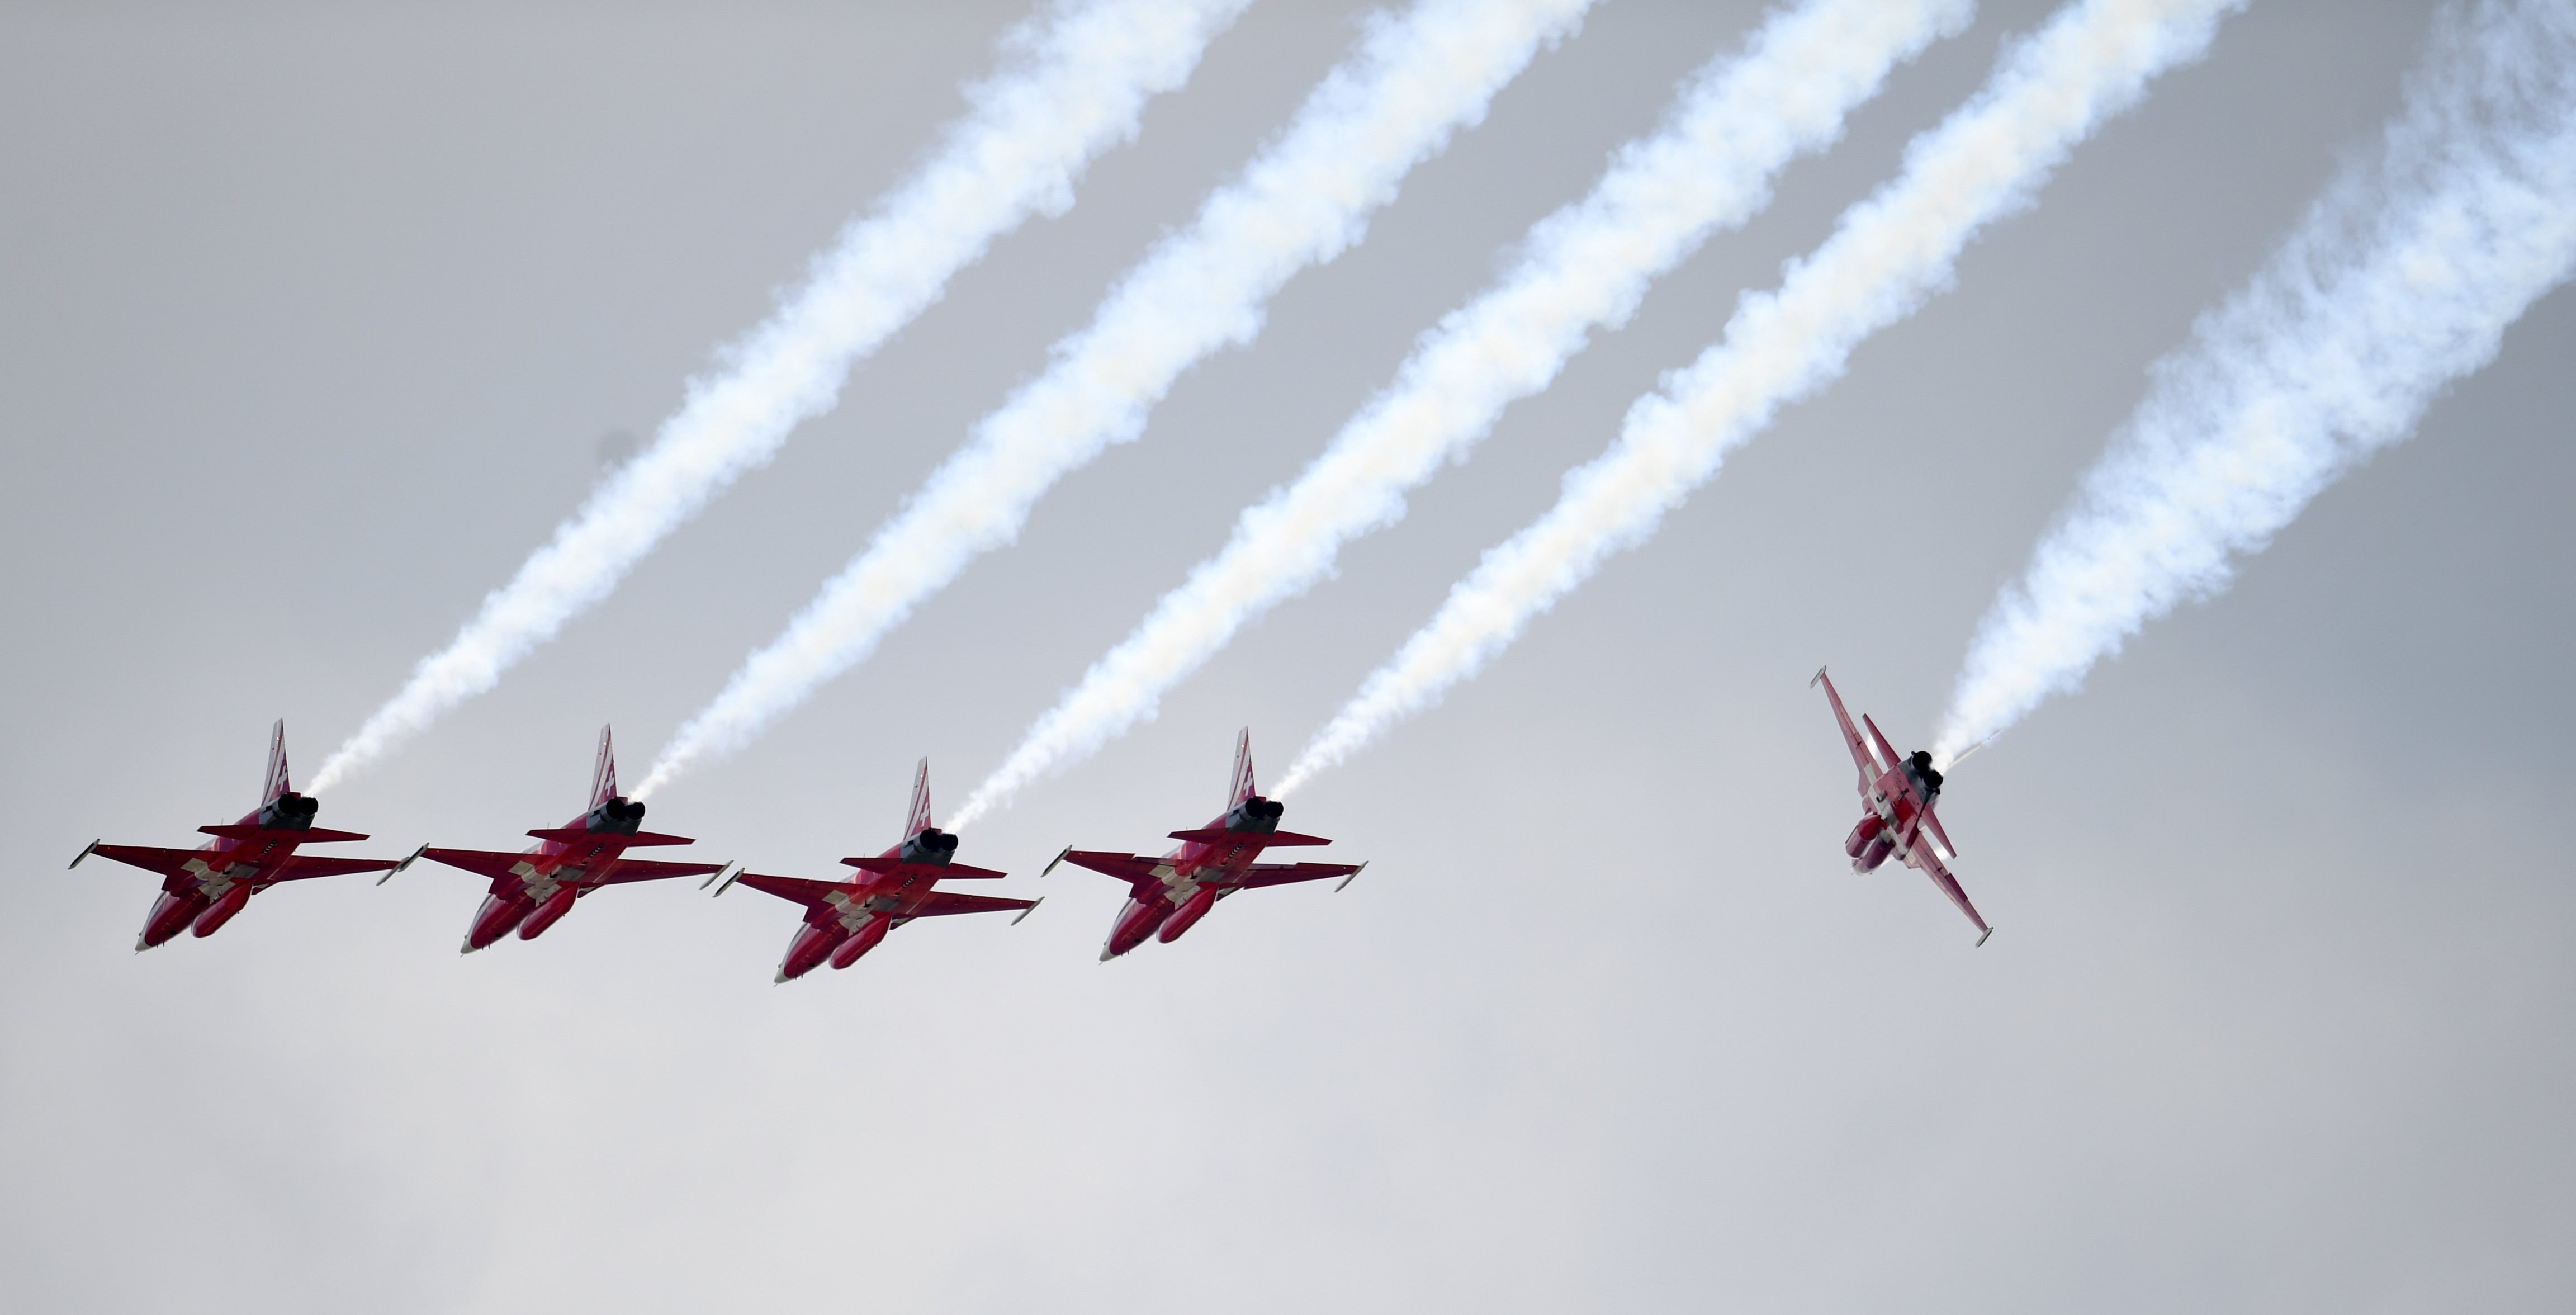 The Swiss Air Force 'Patrouille Suisse'planes perform at the International Aerospace Exhibition (ILA) in Schoenefeld near Berlin, on June 2, 2016. The Aerospace Exhibition at Schoenefeld Airport near Berlin takes place from June 1 till 4. / AFP PHOTO / Ralf Hirschberger / Germany OUT